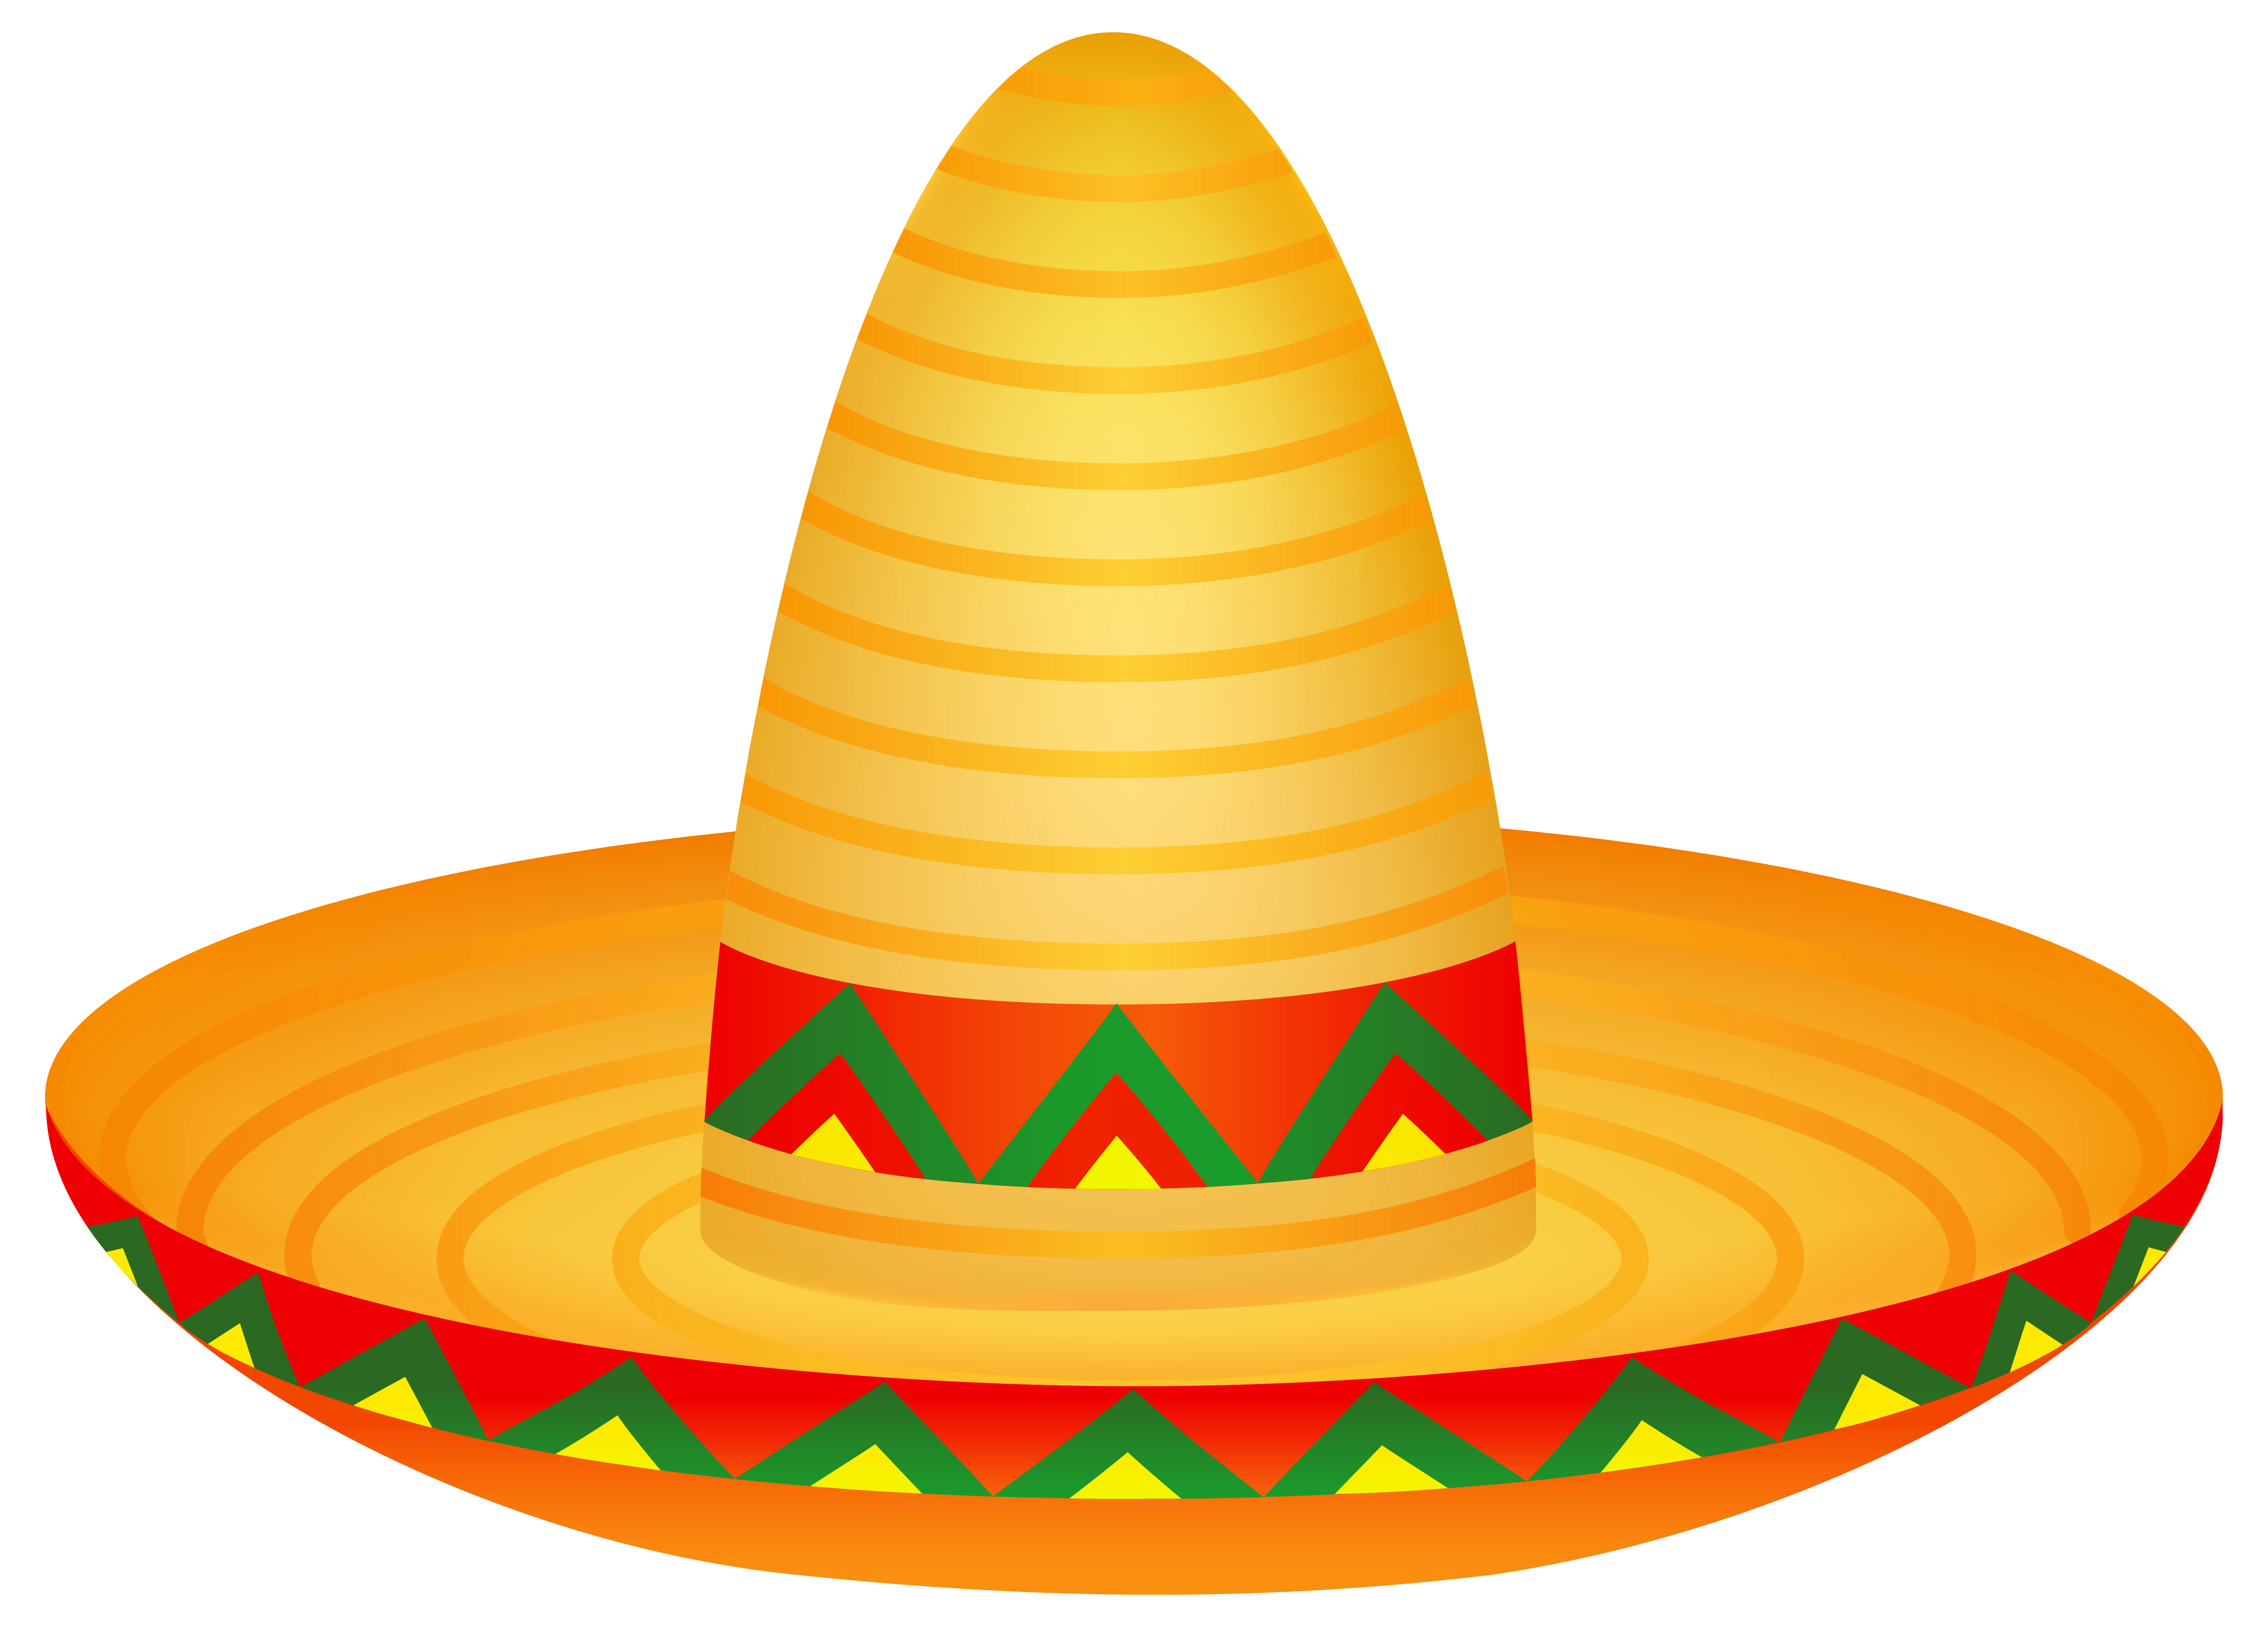 Search, Google and Sombreros;